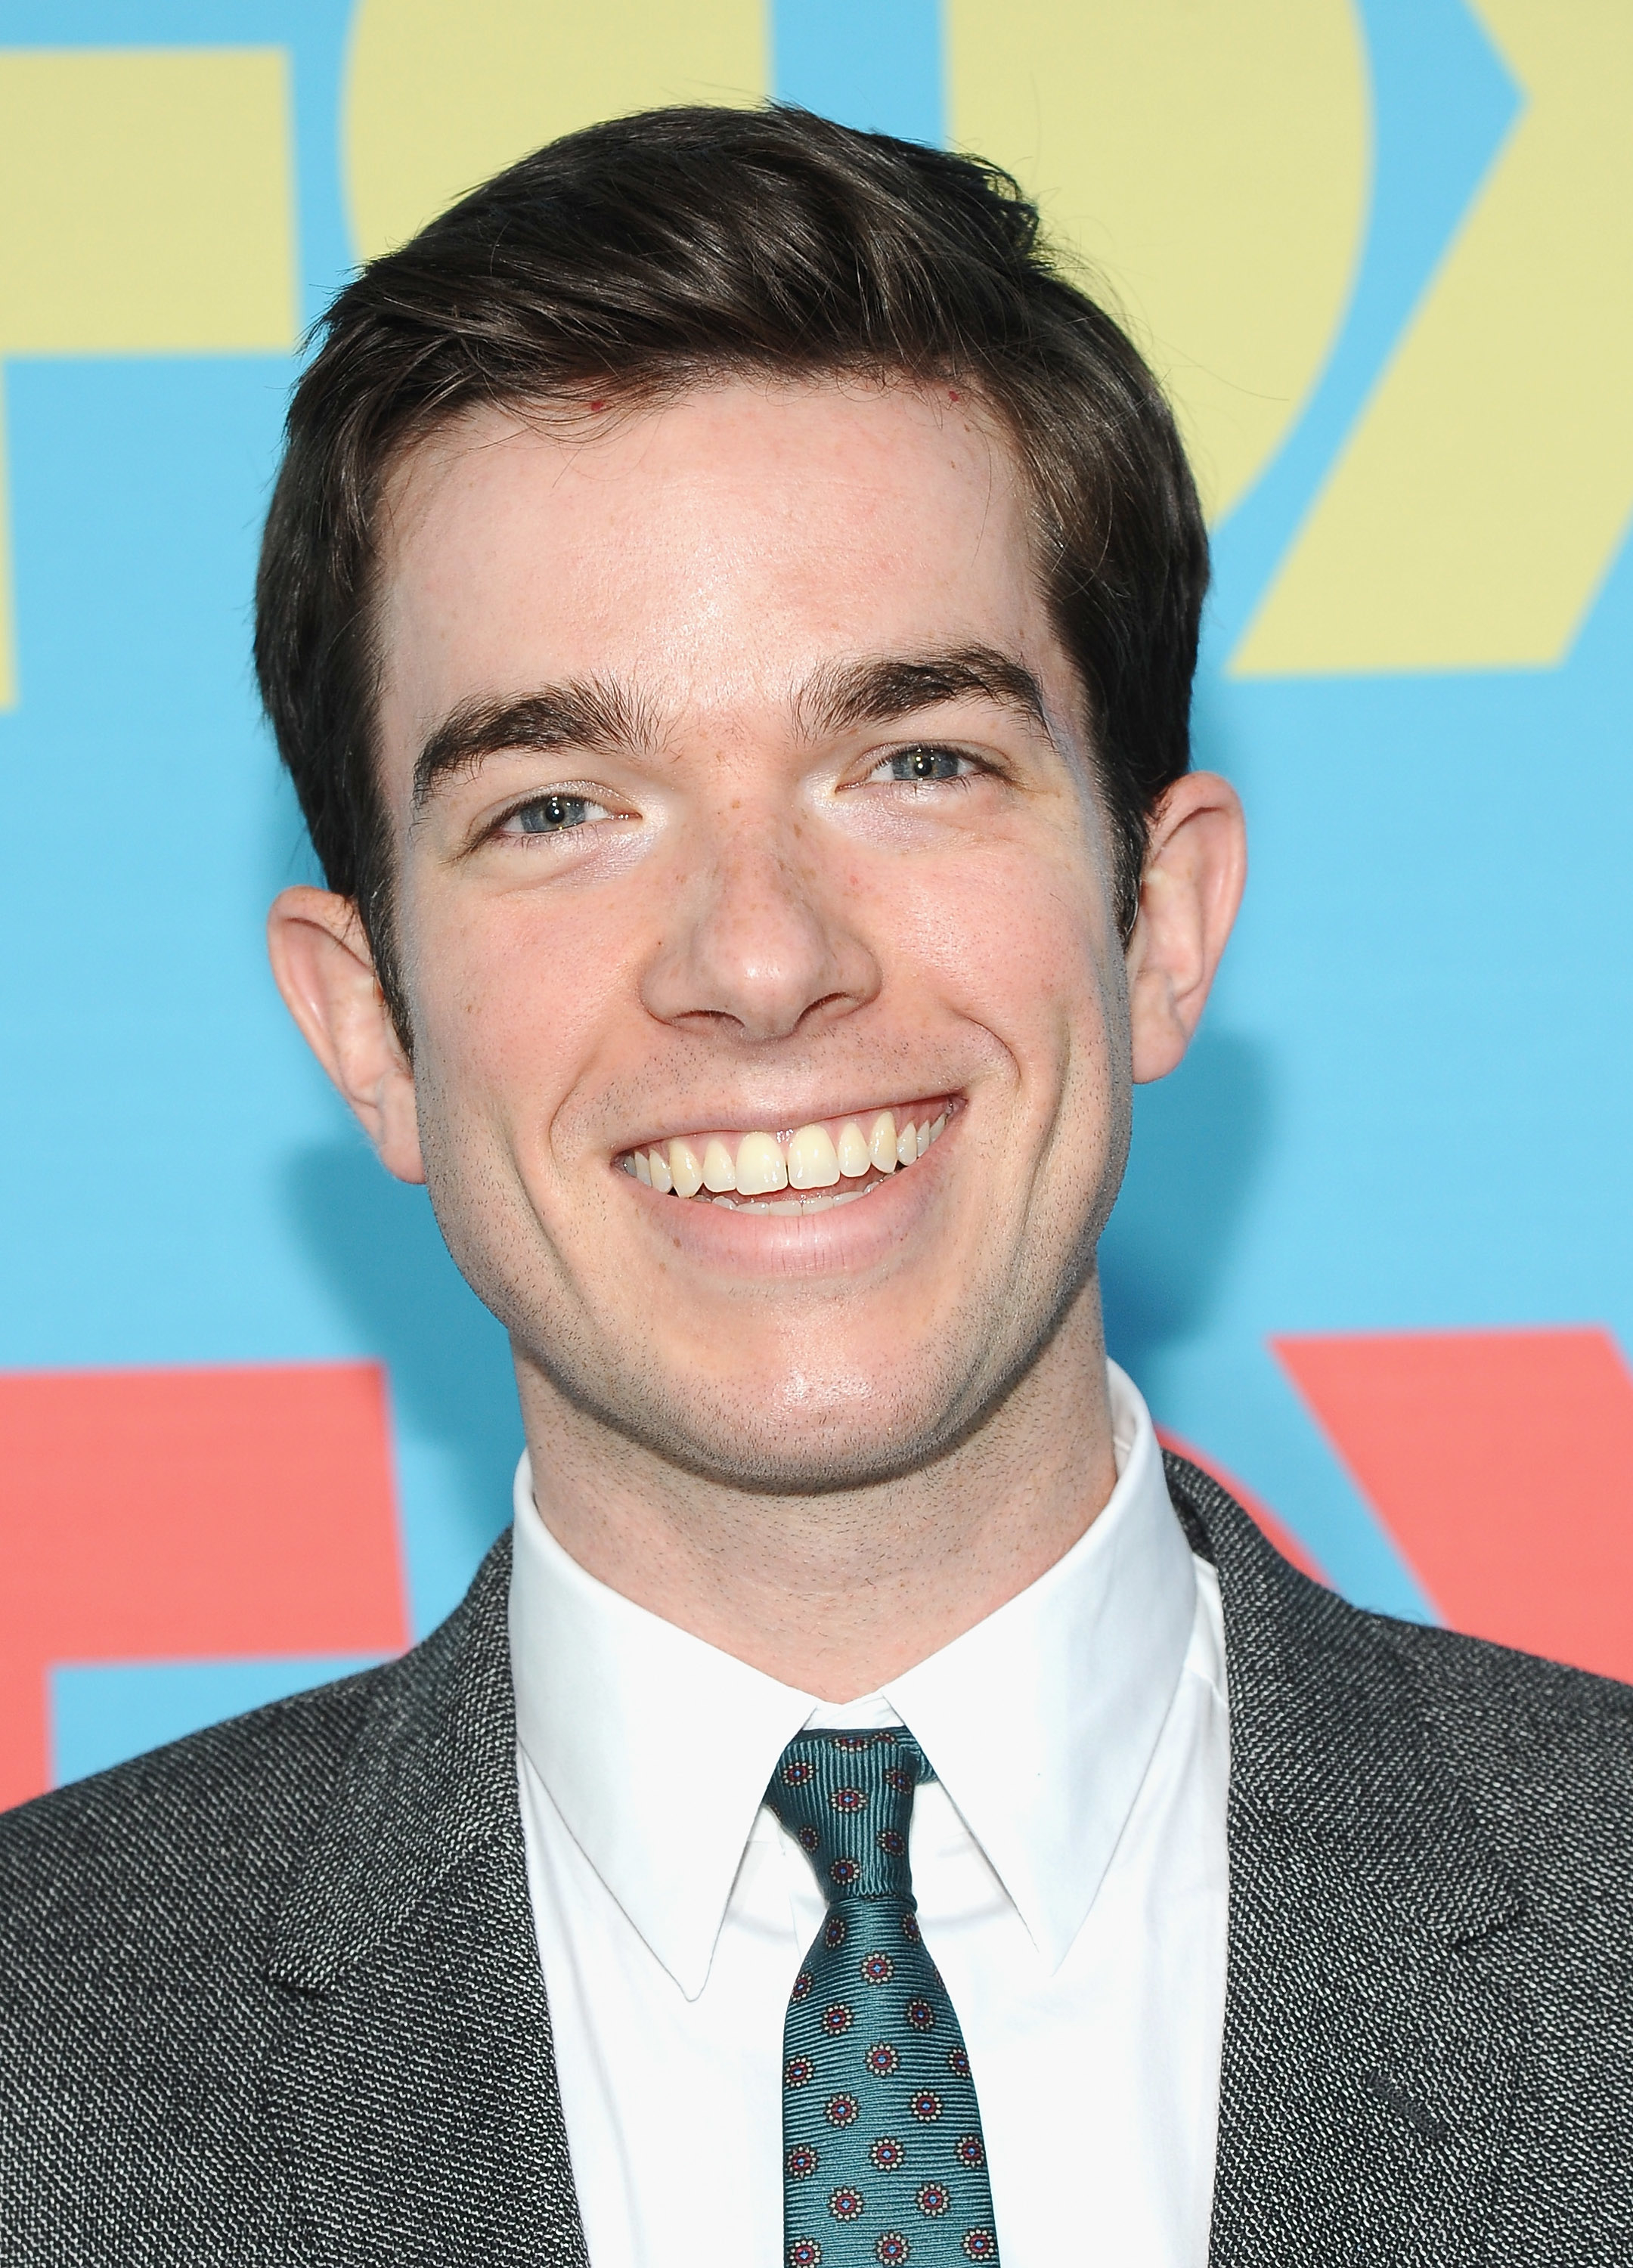 John Mulaney at the FOX Fanfront in 2014 in a gray suit, white collared shirt, and dotted tie